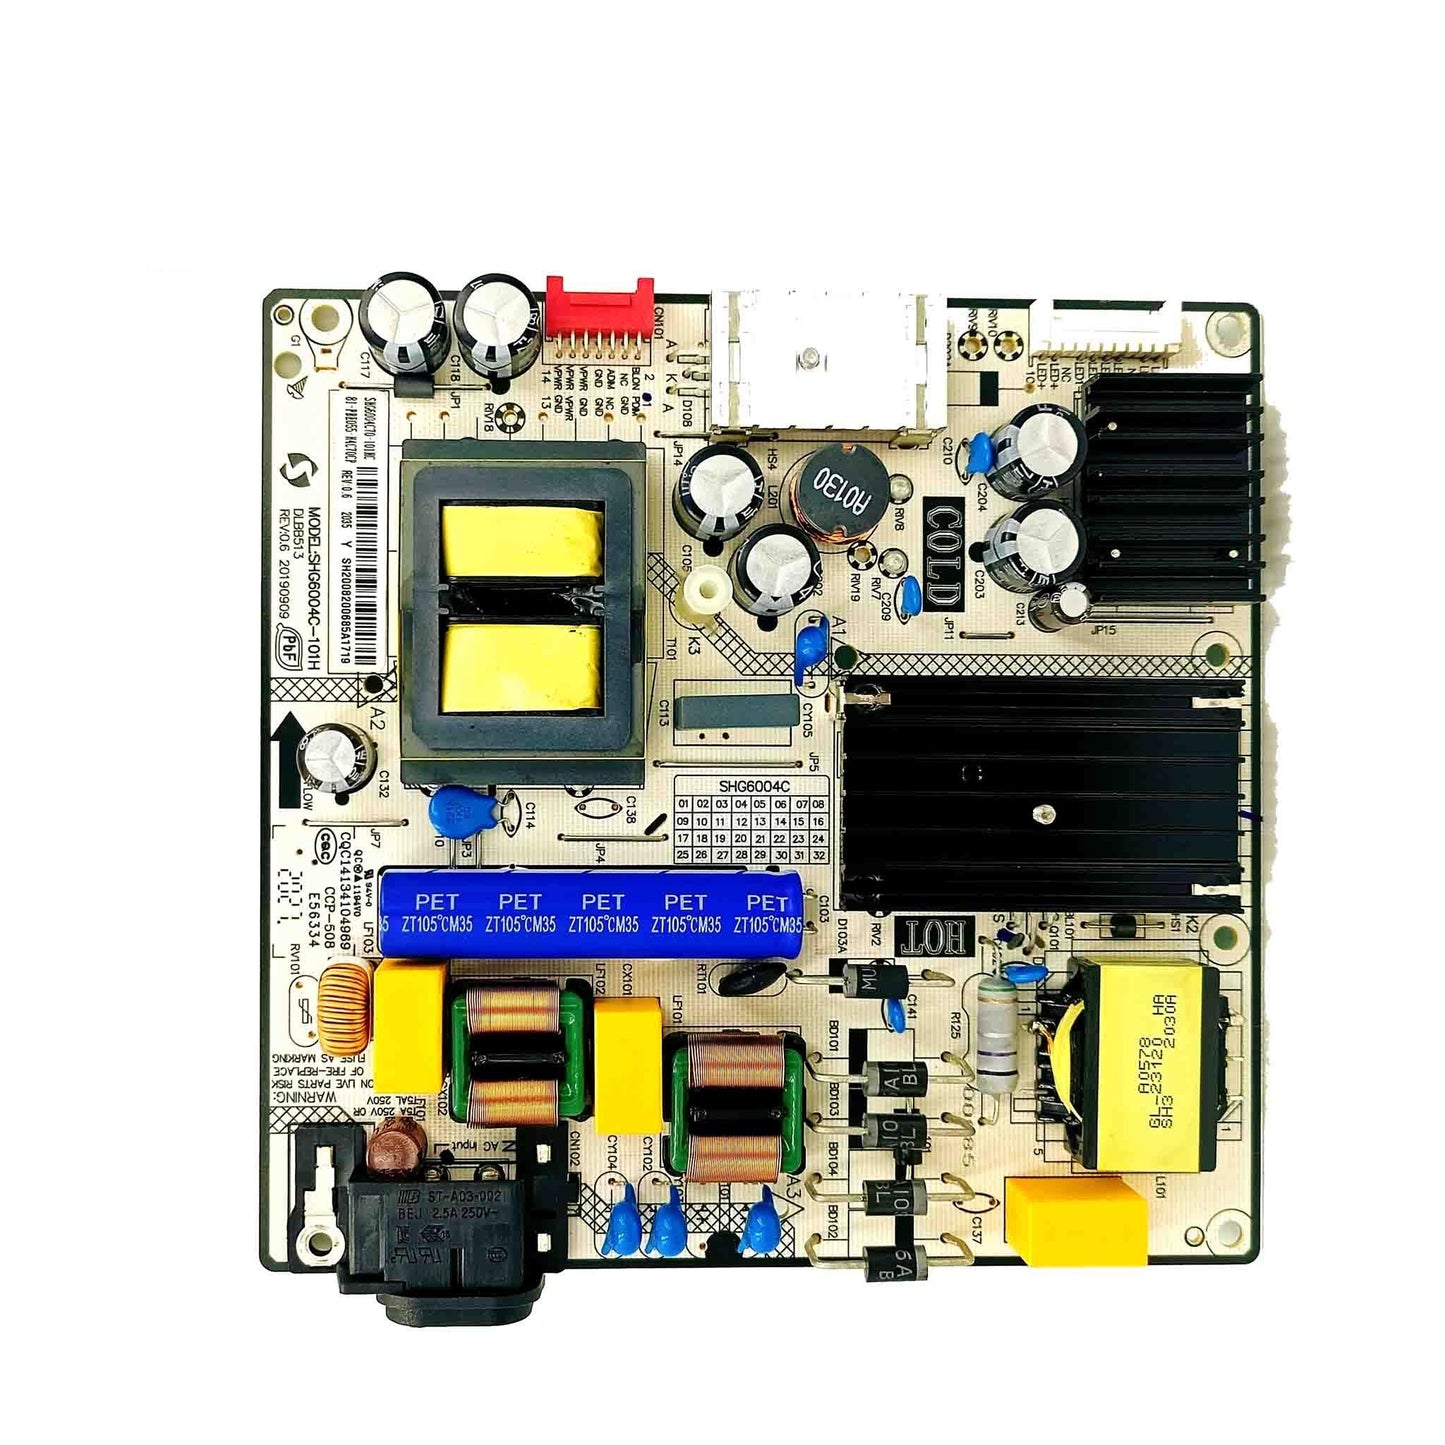 Power Supply Suitable for Nokia LED TV Model 55TAUHDN